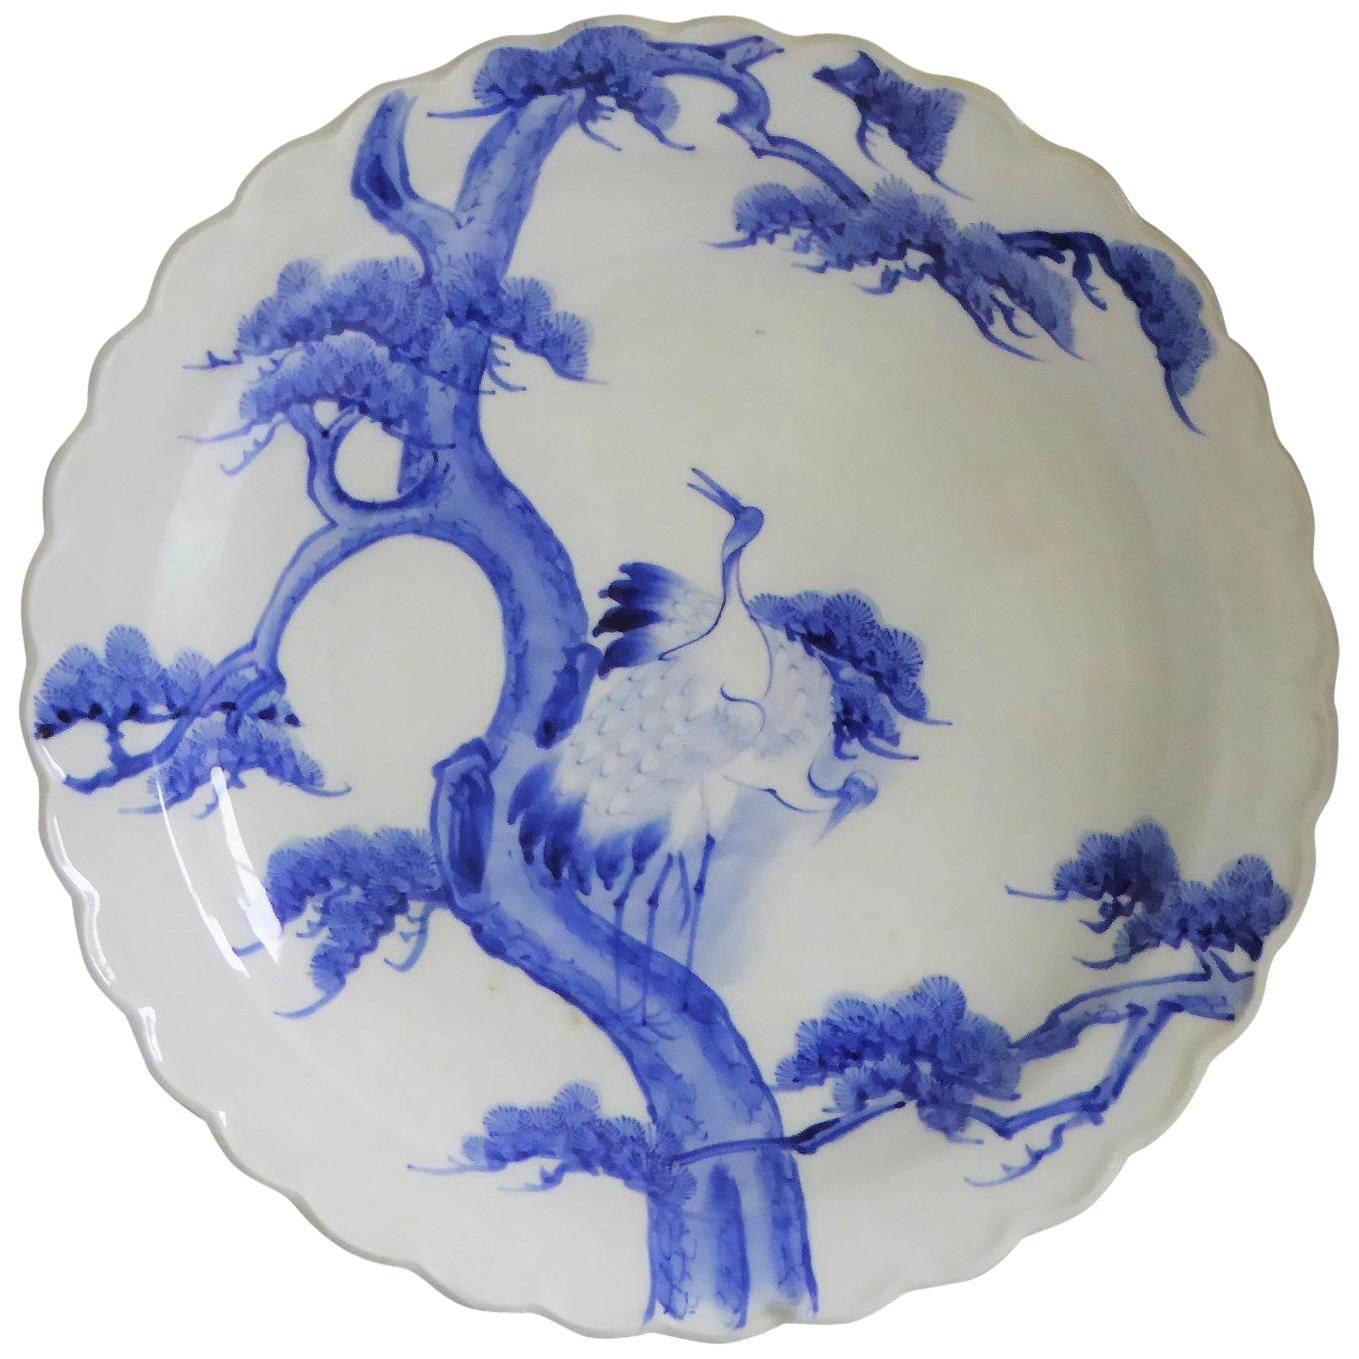 Japanese Scalloped Charger Blue White Pair of Cranes on Pine Tree Meiji Period